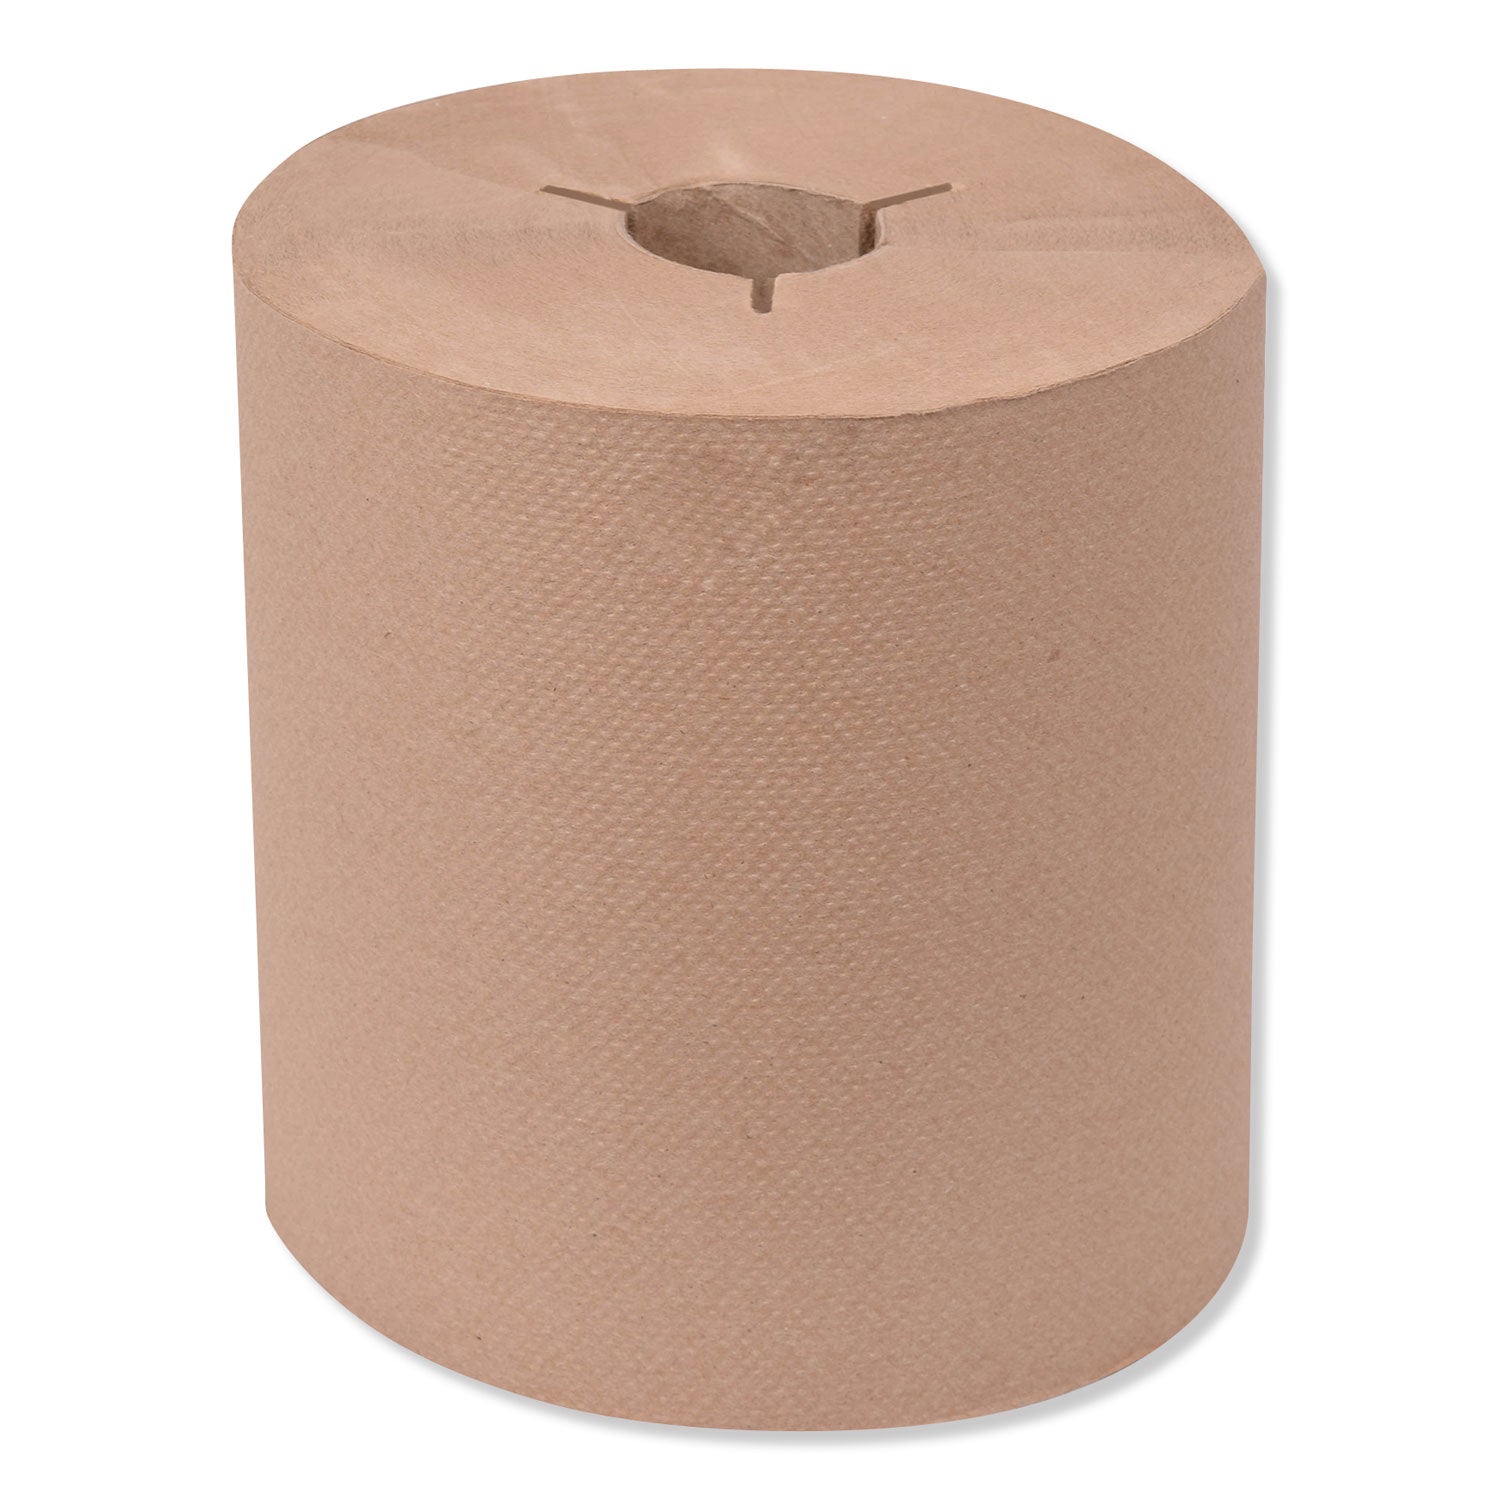 universal-hand-towel-roll-notched-1-ply-8-x-800-ft-natural-6-rolls-carton_trk8031300 - 1